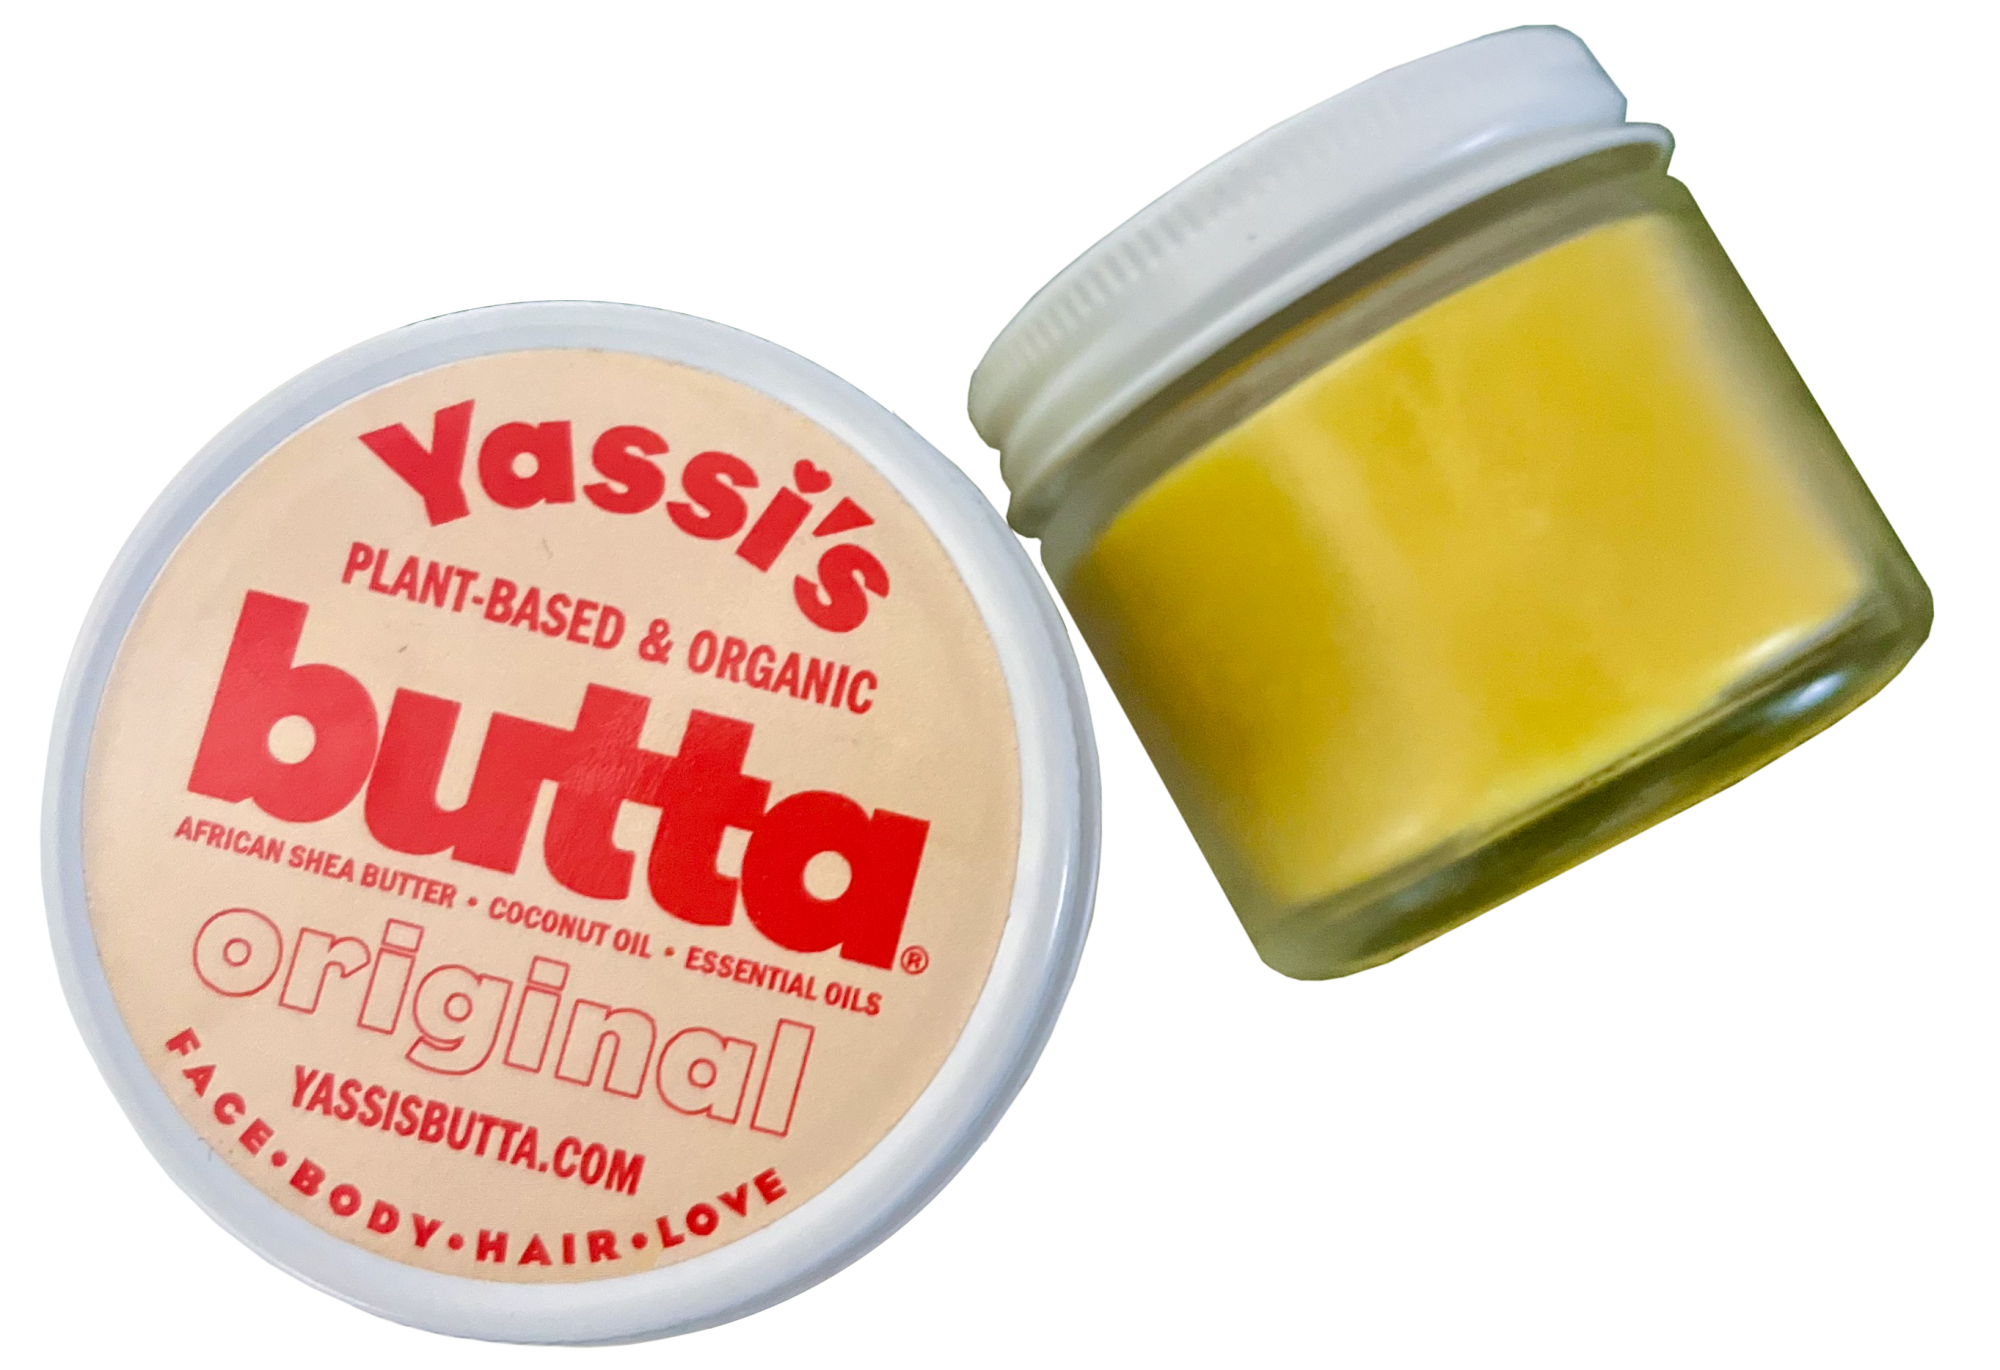 A container of Yassi's Butta salve